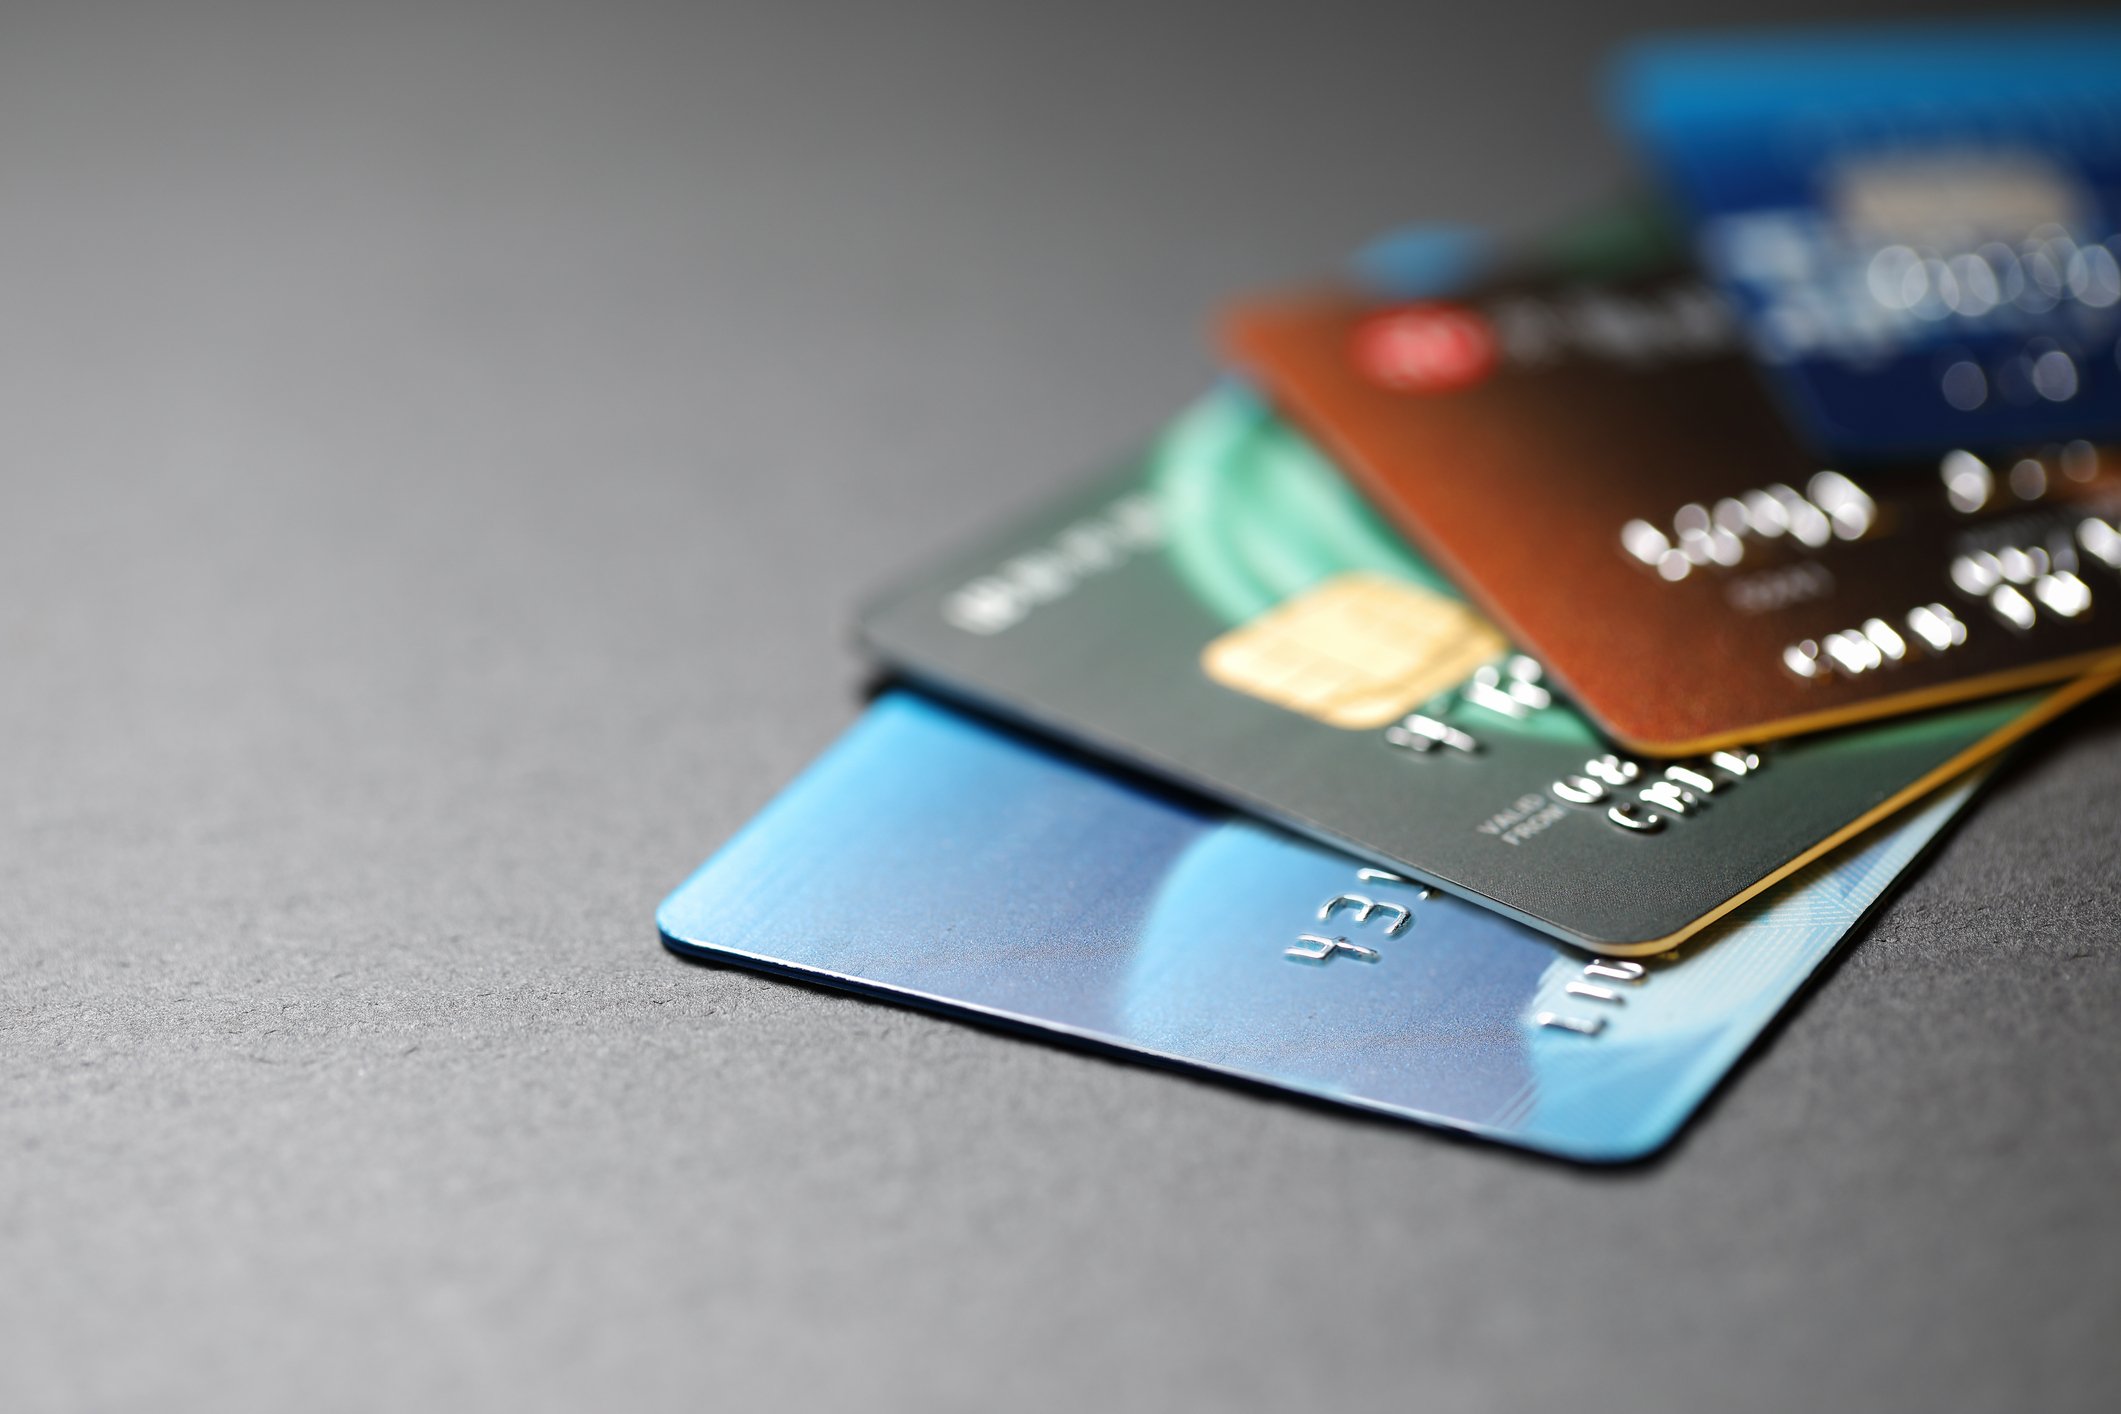 How Did We Select the Best No Interest Credit Cards?